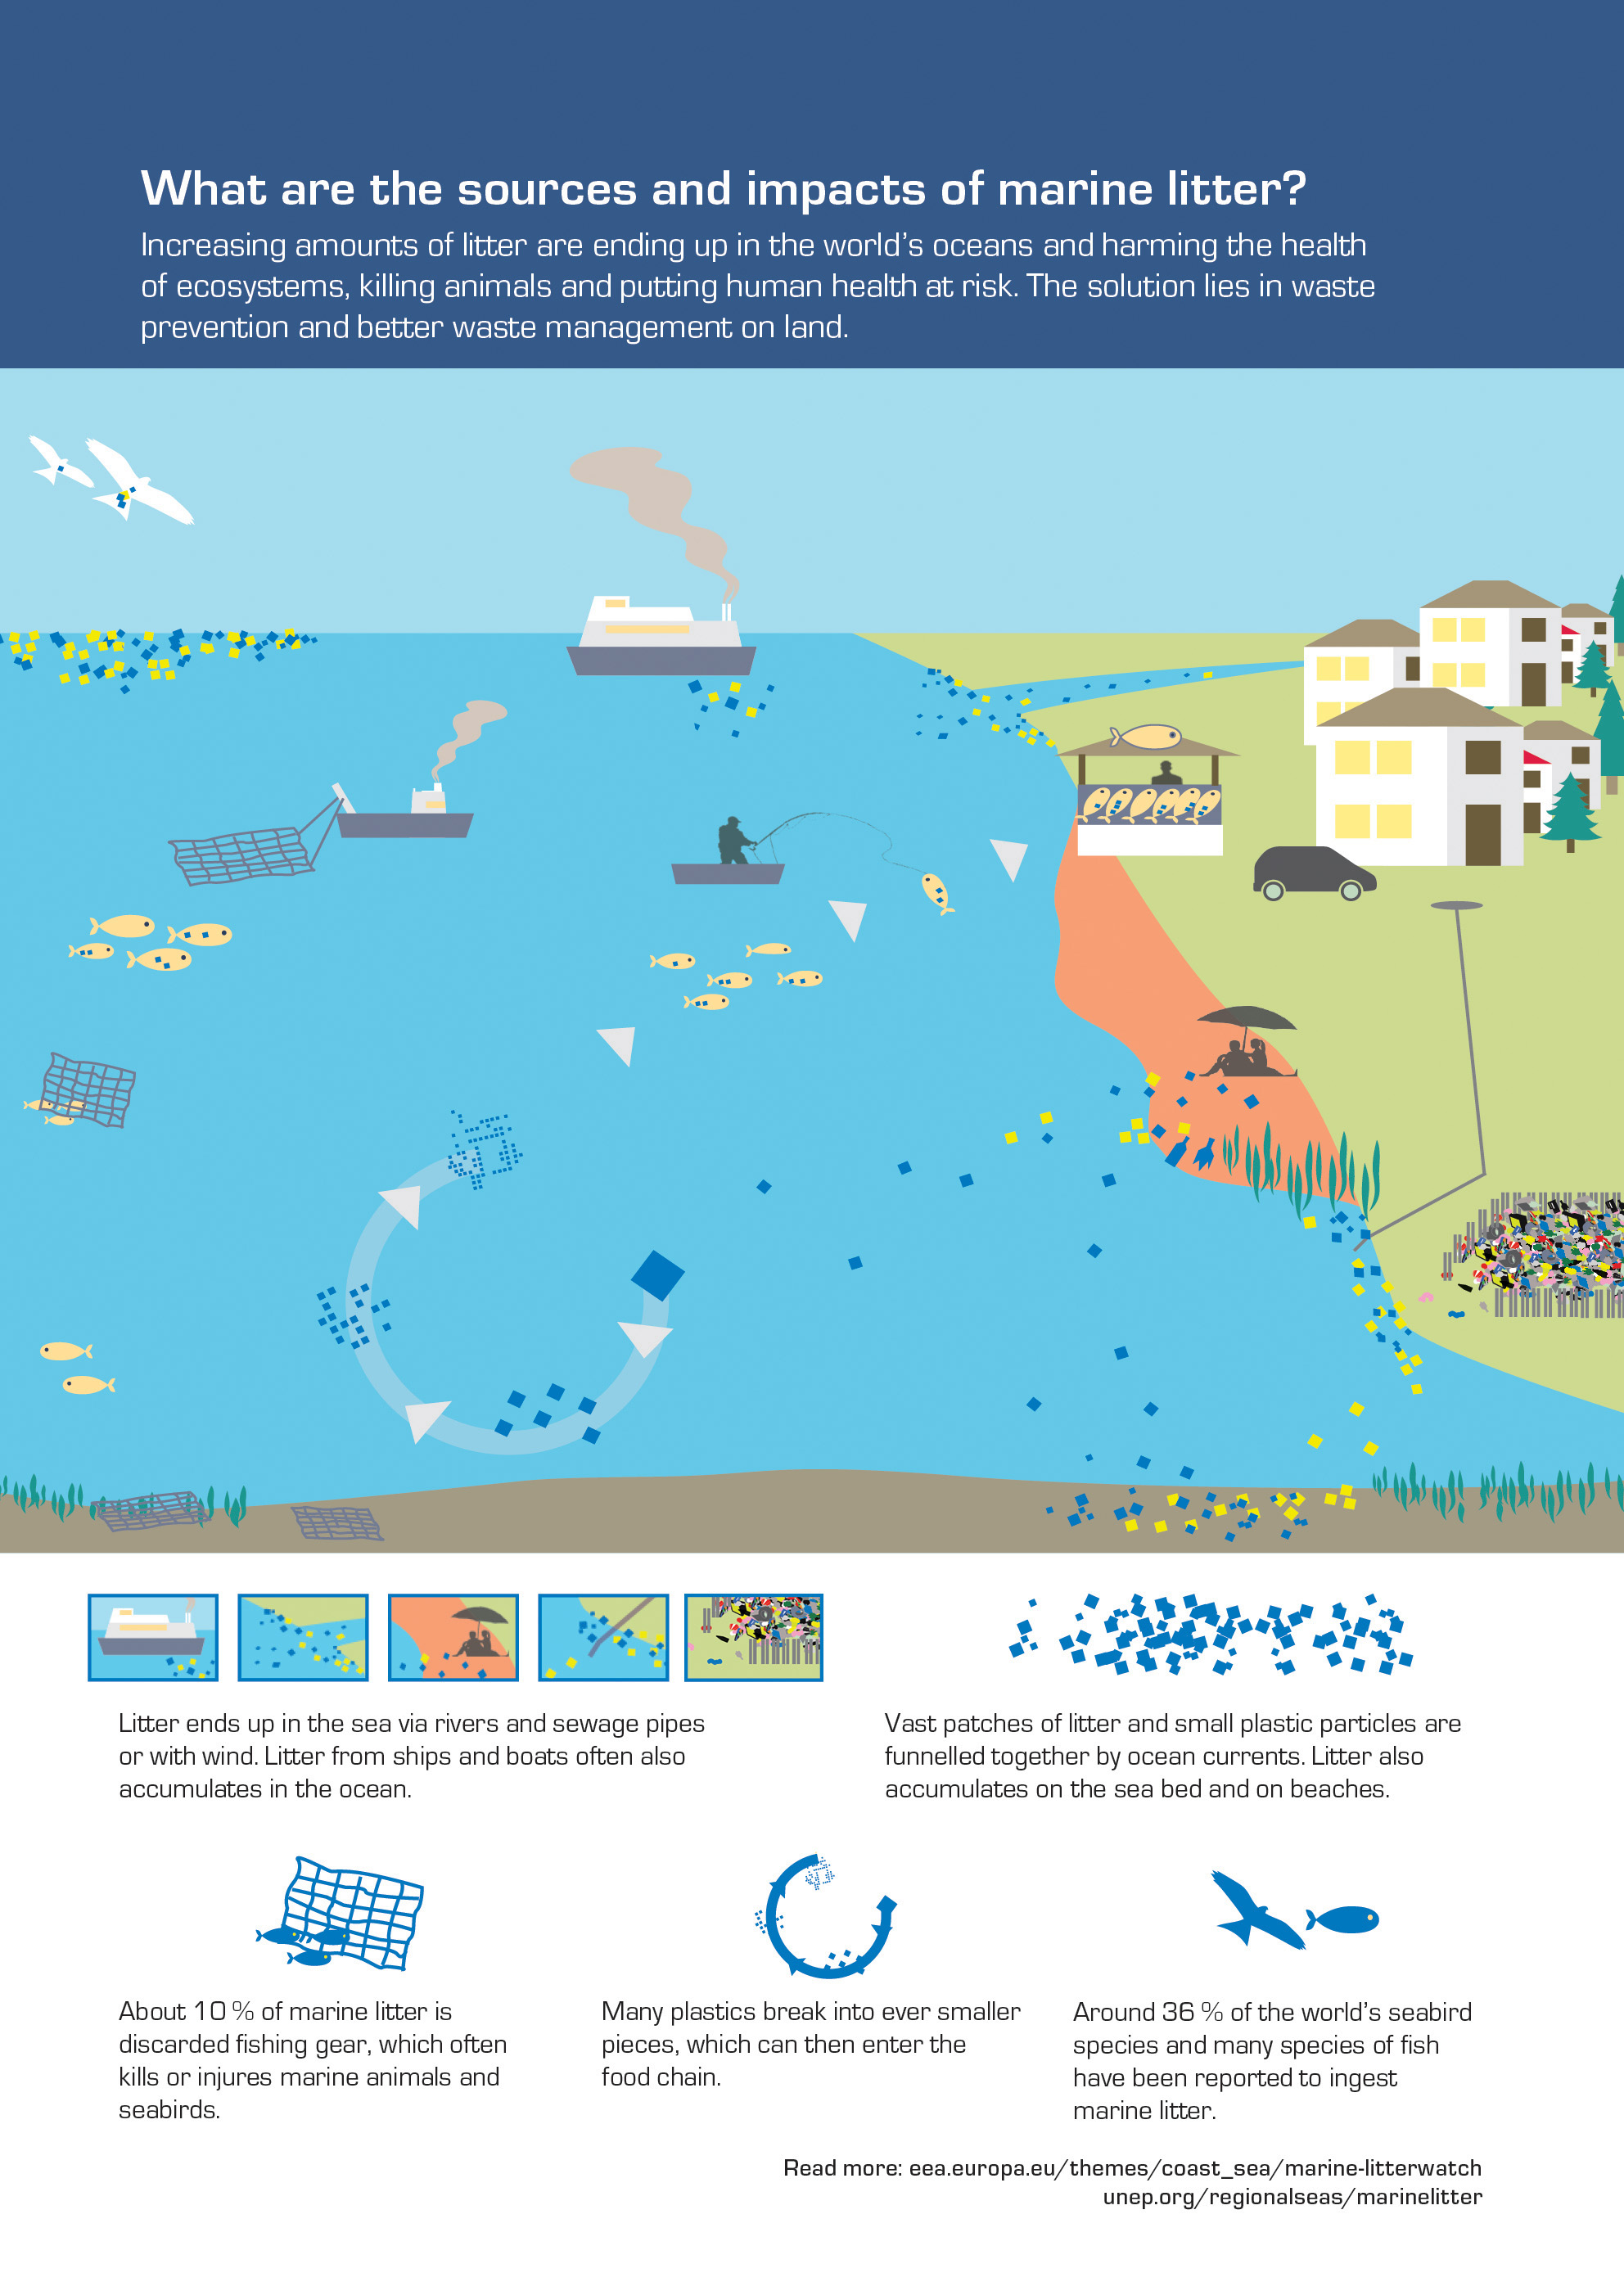 What are the sources and impacts of marine litter?